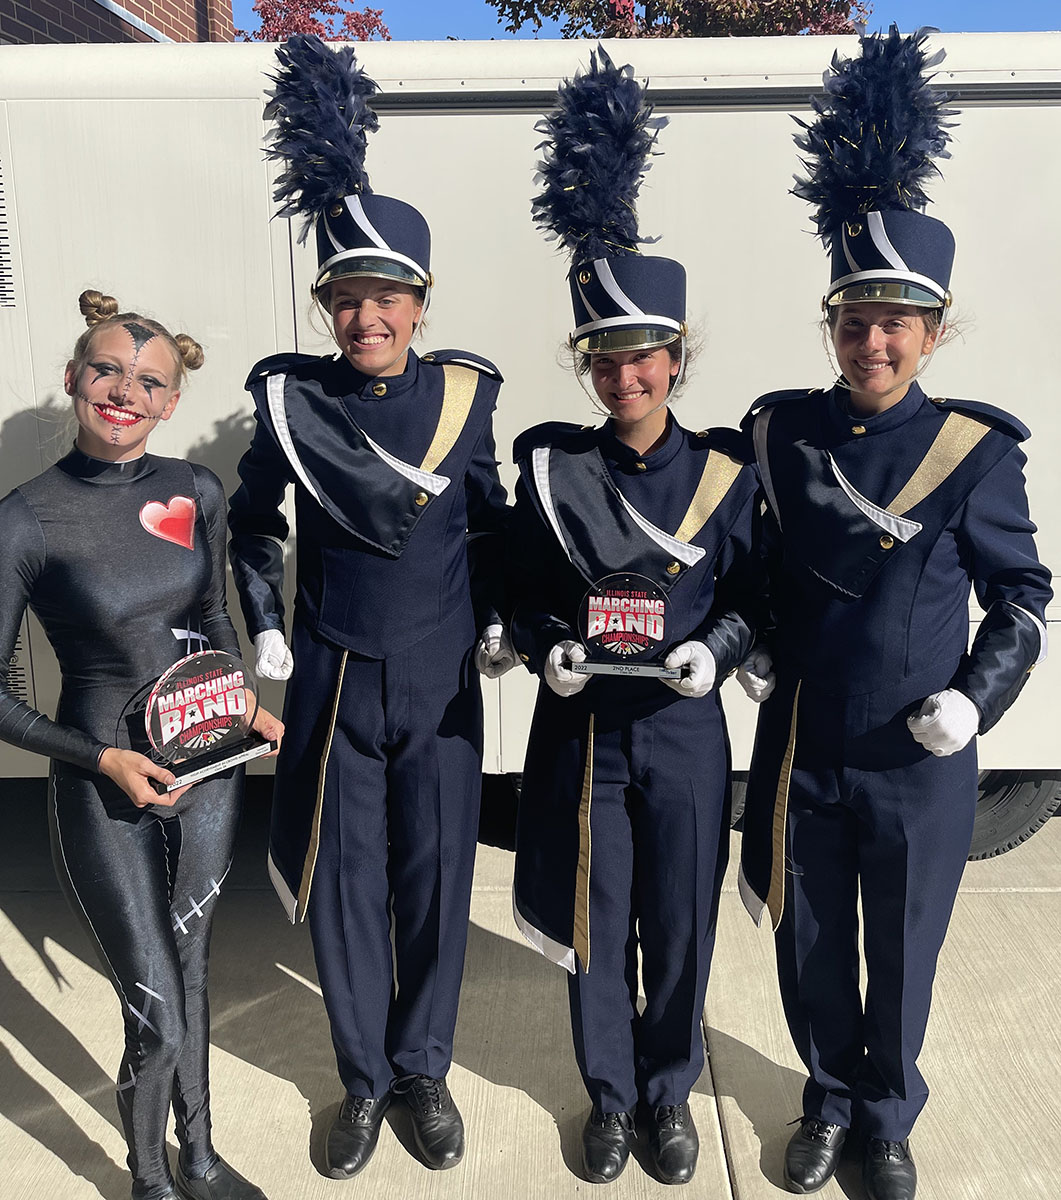 Lemont marching band repeats as Class 3A runnerup at state competition